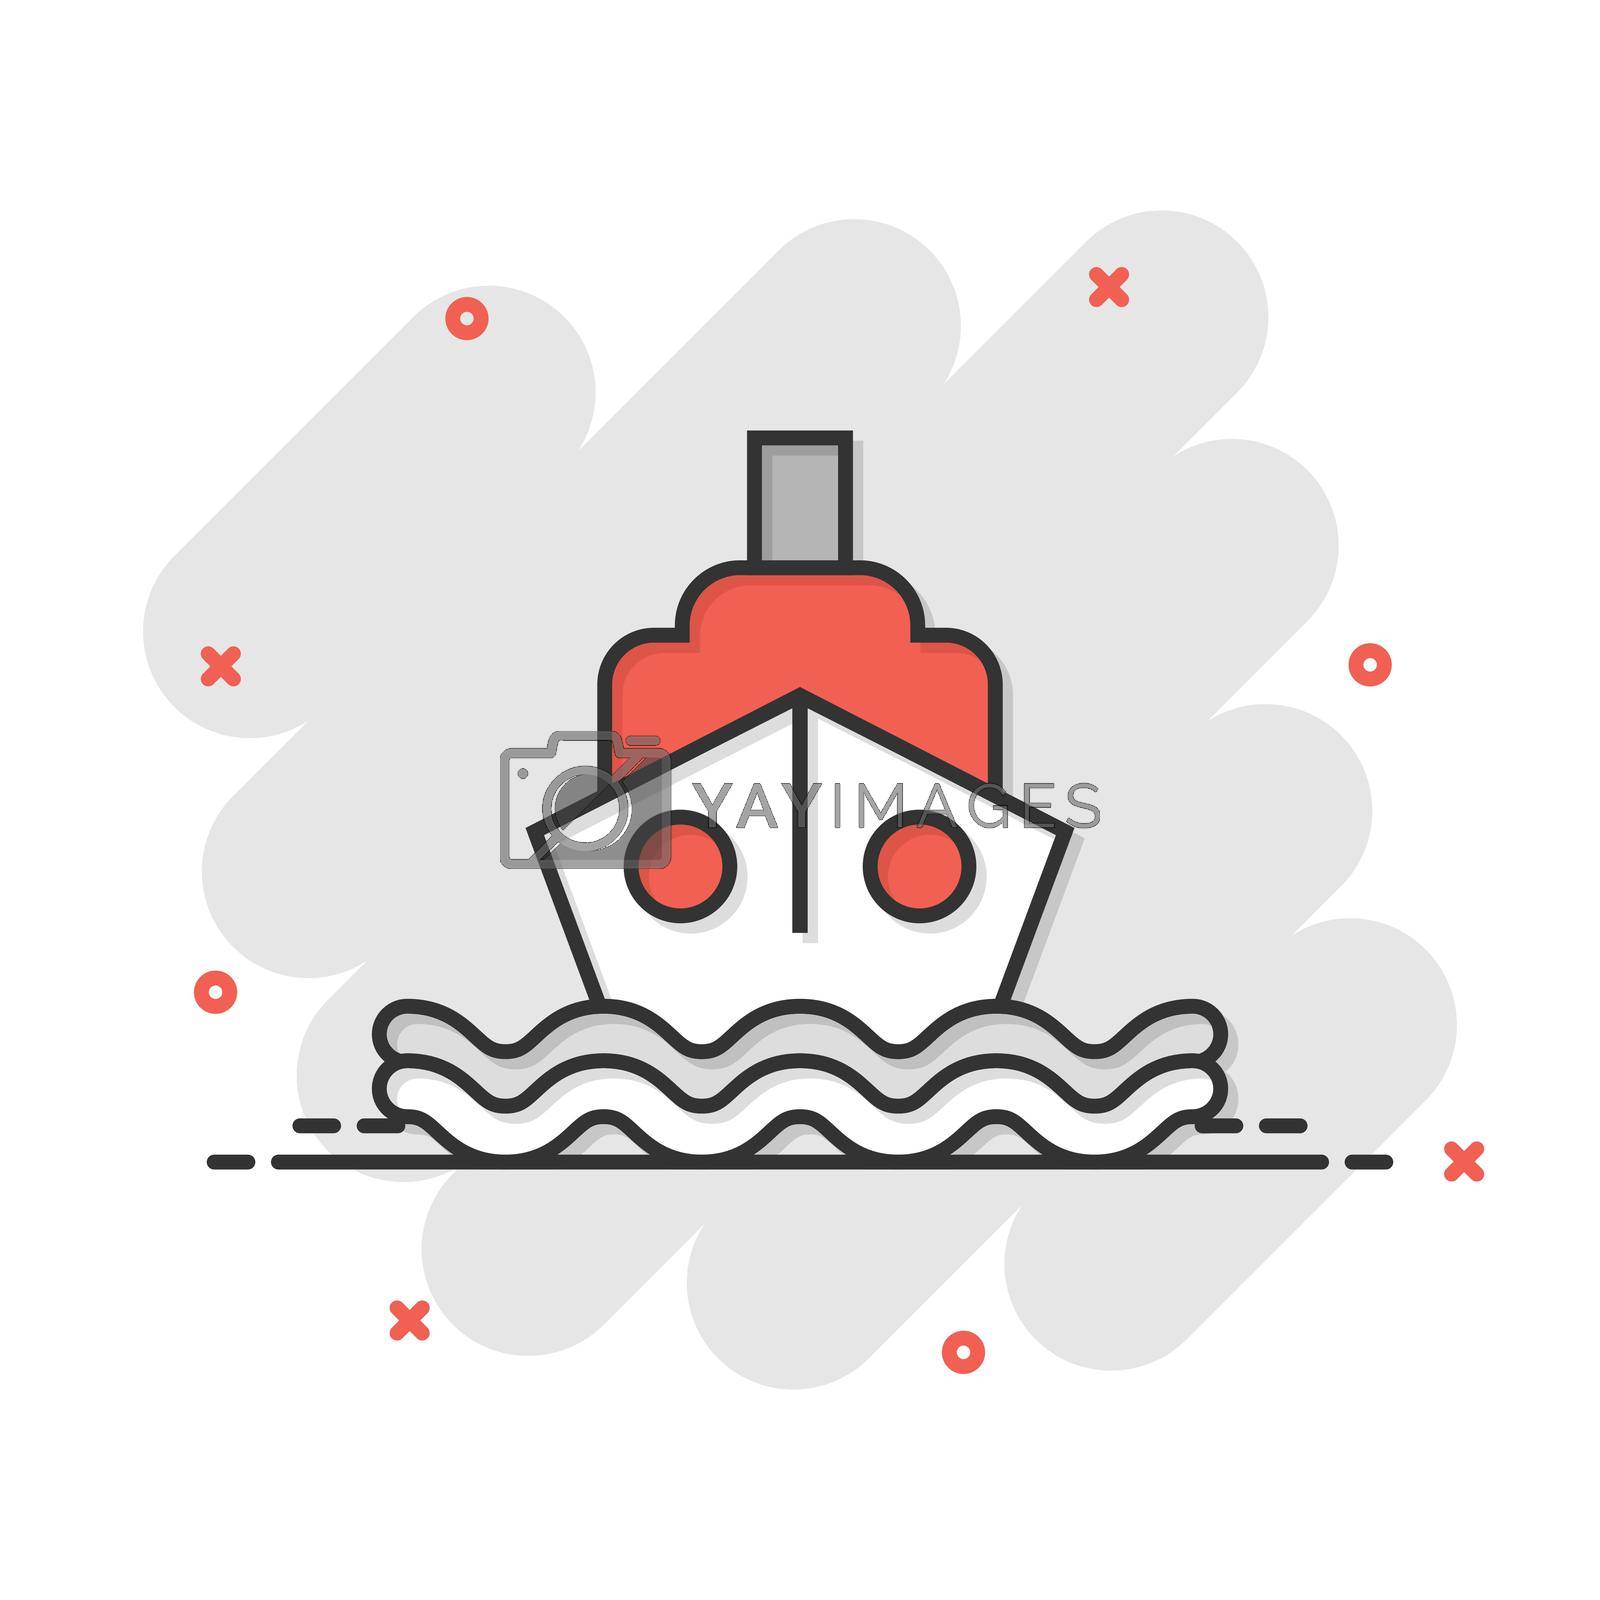 Royalty free image of Tourism ship icon in comic style. Fishing boat cartoon vector illustration on white isolated background. Tanker destination splash effect business concept. by LysenkoA